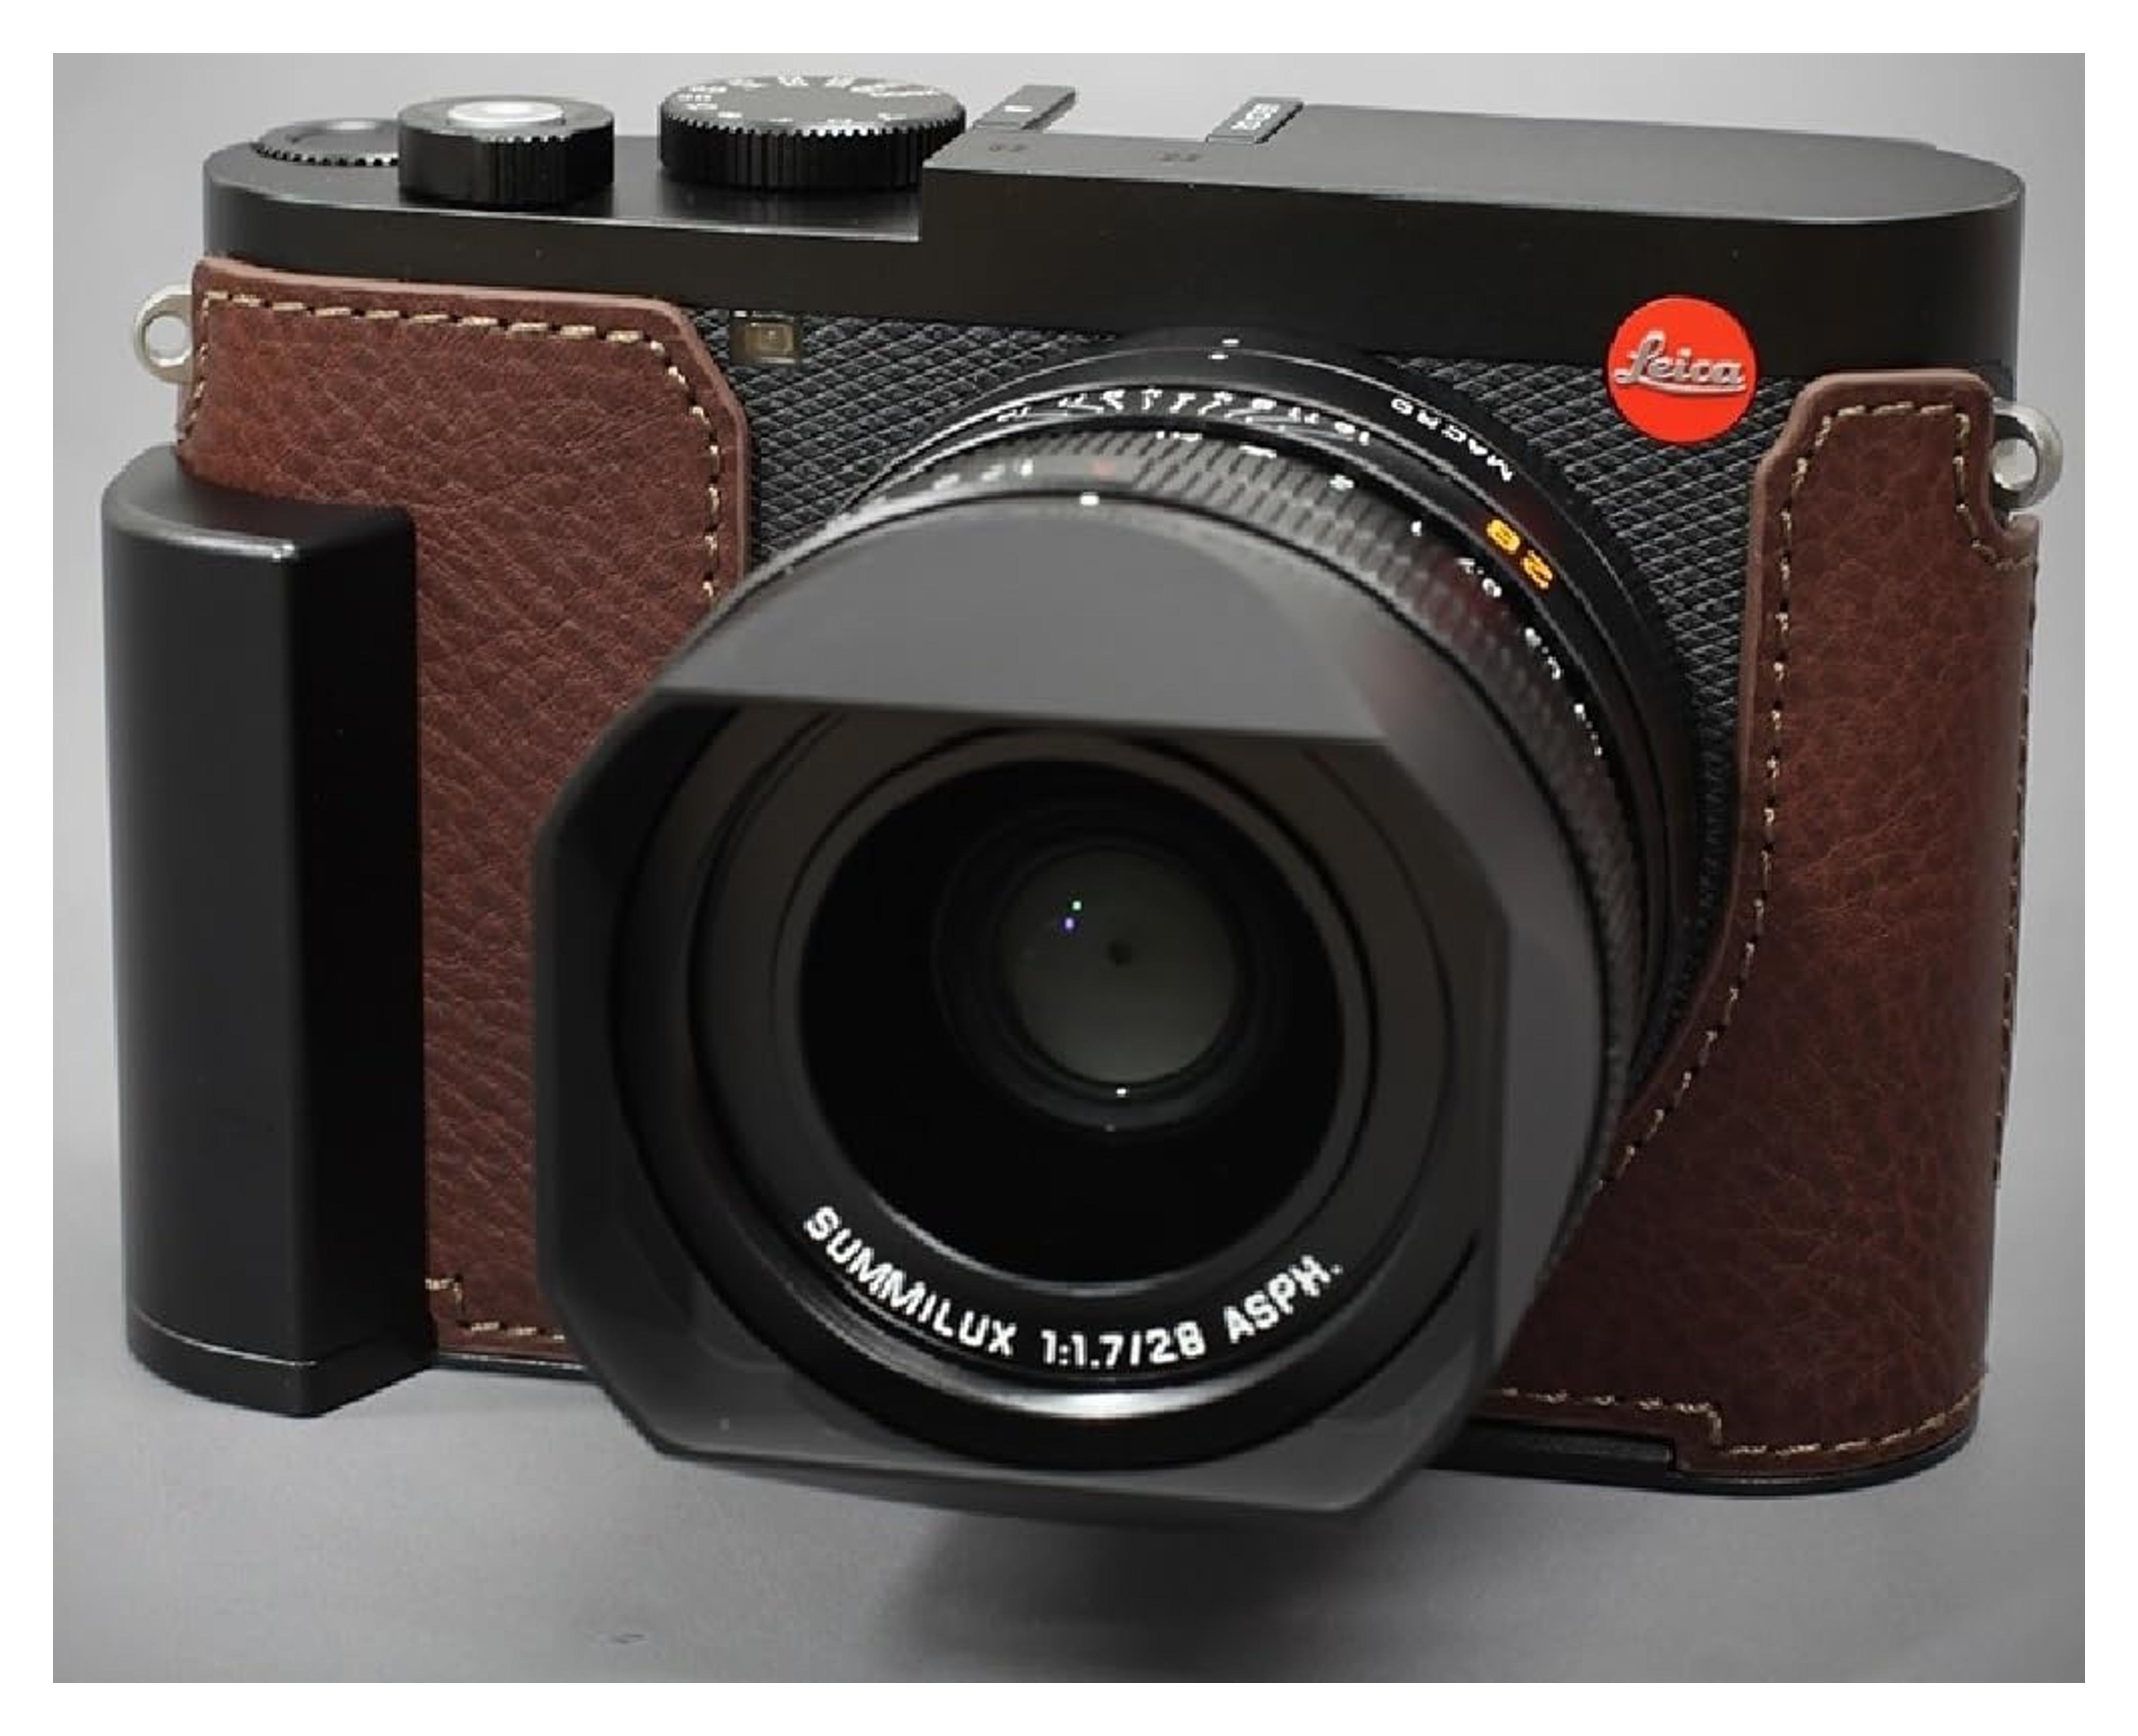 Amazon.com: LIM'S Genuine Italy Leather Camera Half Case Metal Grip Dovetail Plate for Leica Q3 [Brown] : Electronics